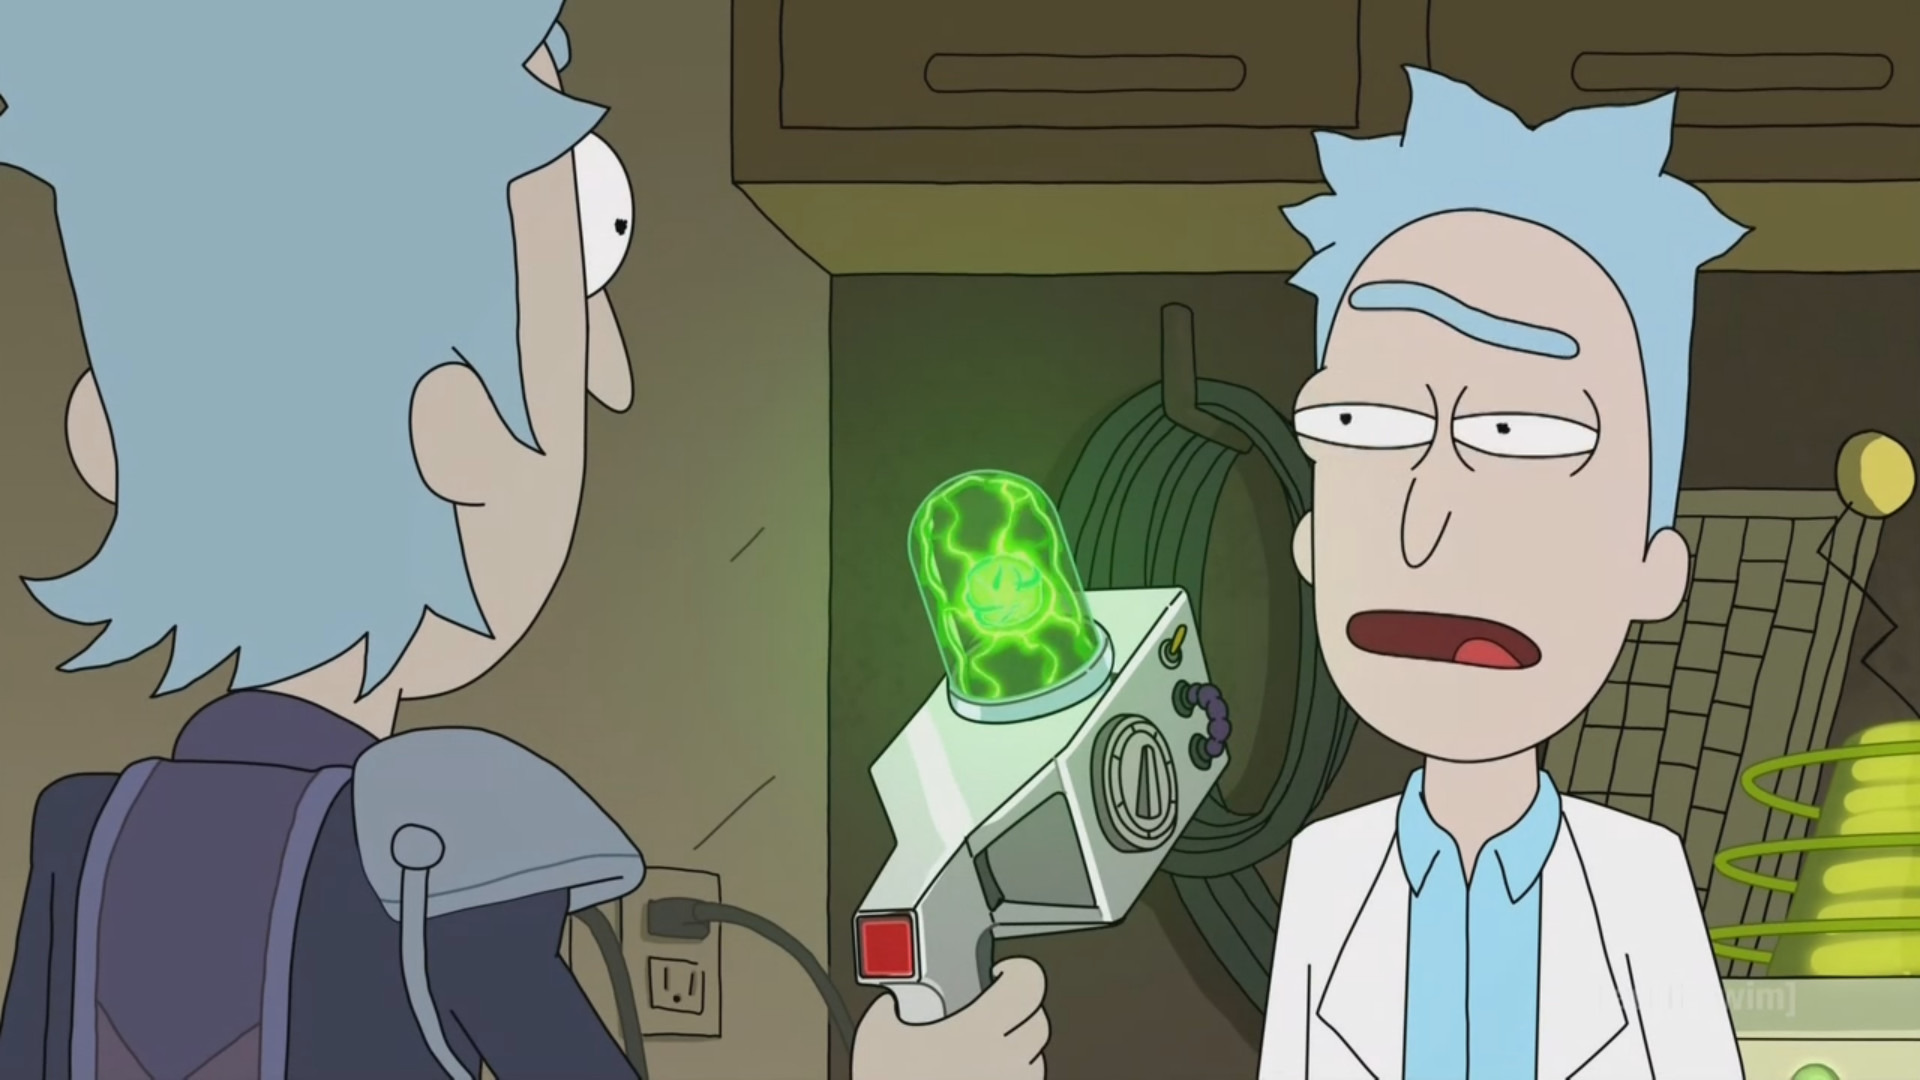 1920x1080 Rick and Morty Season 3 Episode 1 Rick Portal Gun - Thought for Your Penny